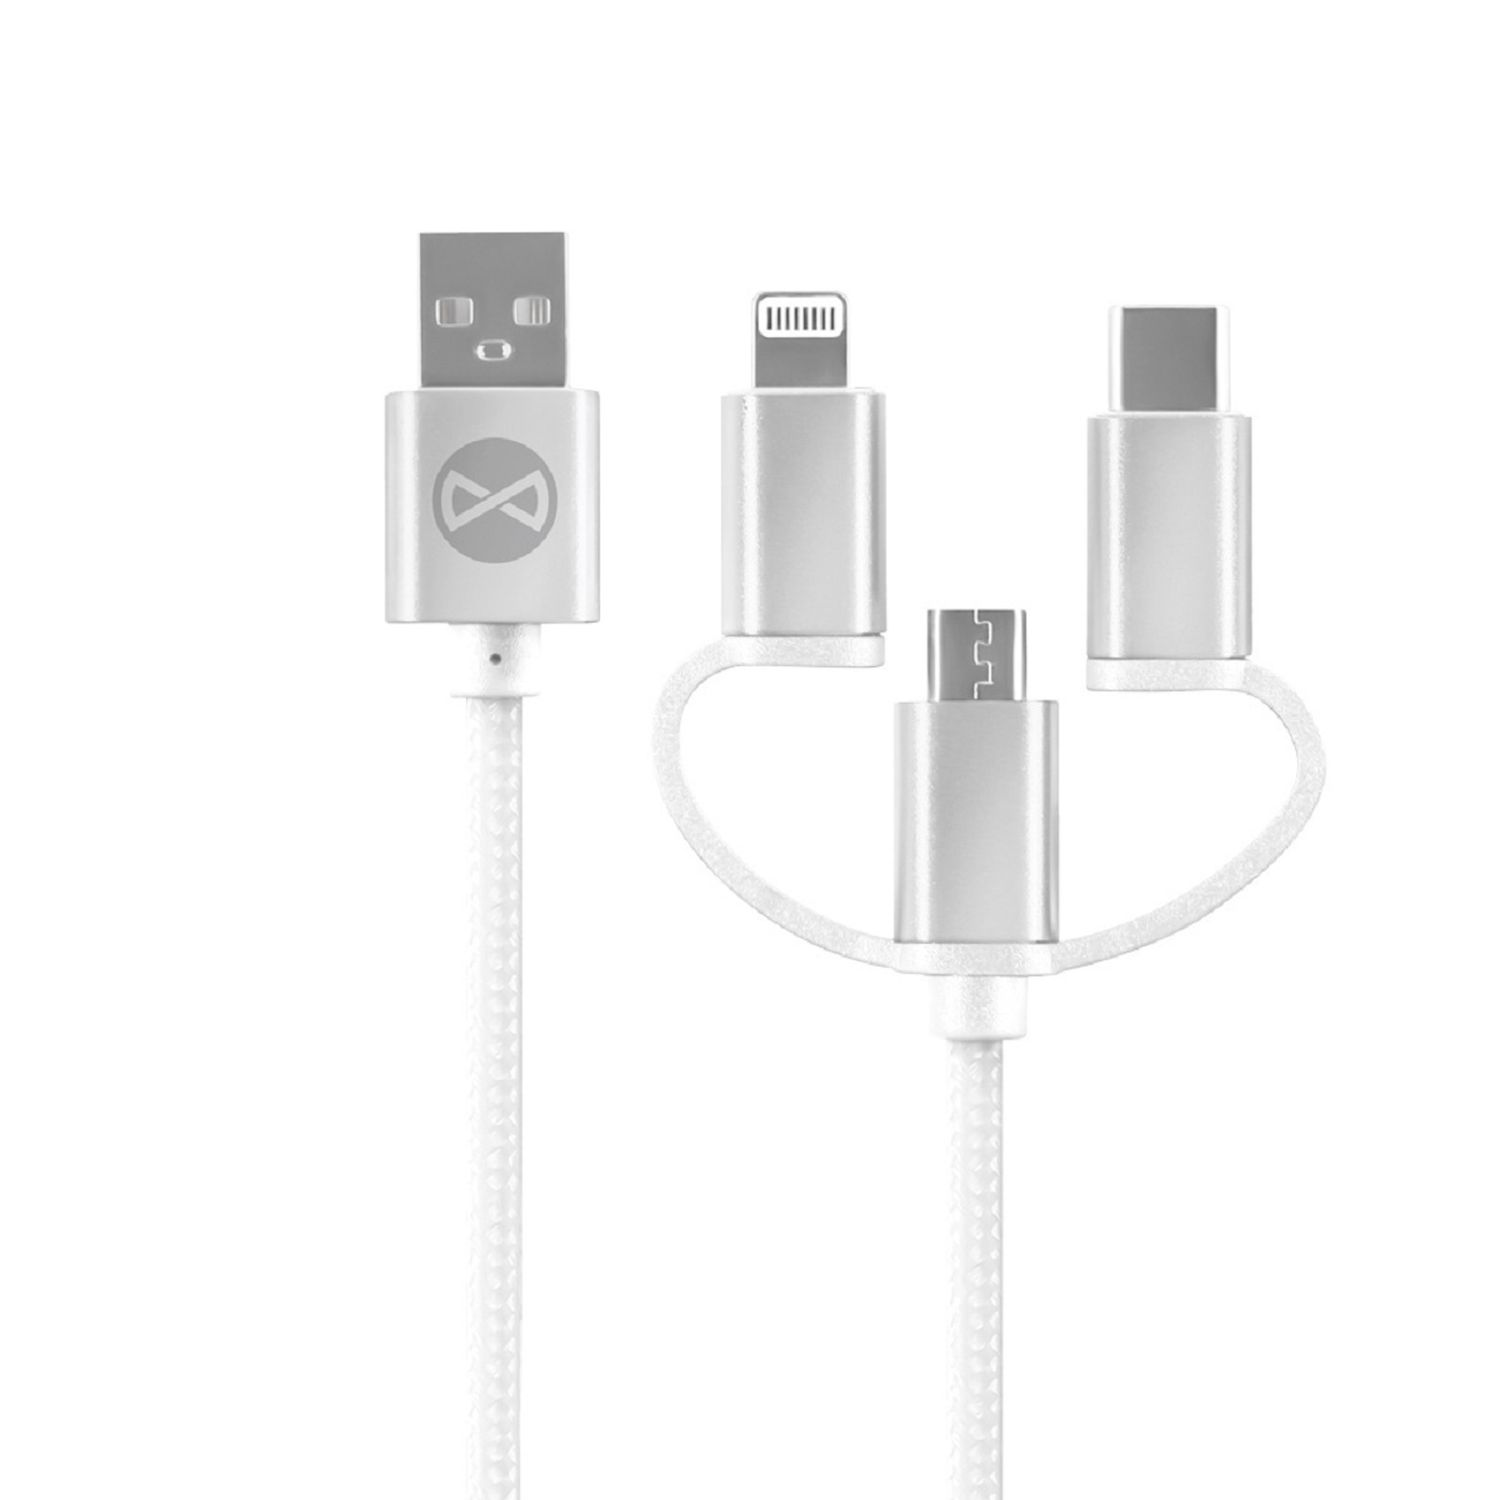 FOREVER + iPhone Weiß - Ladekabel, 1,2m, 3in1 + USB-C microUSB USB